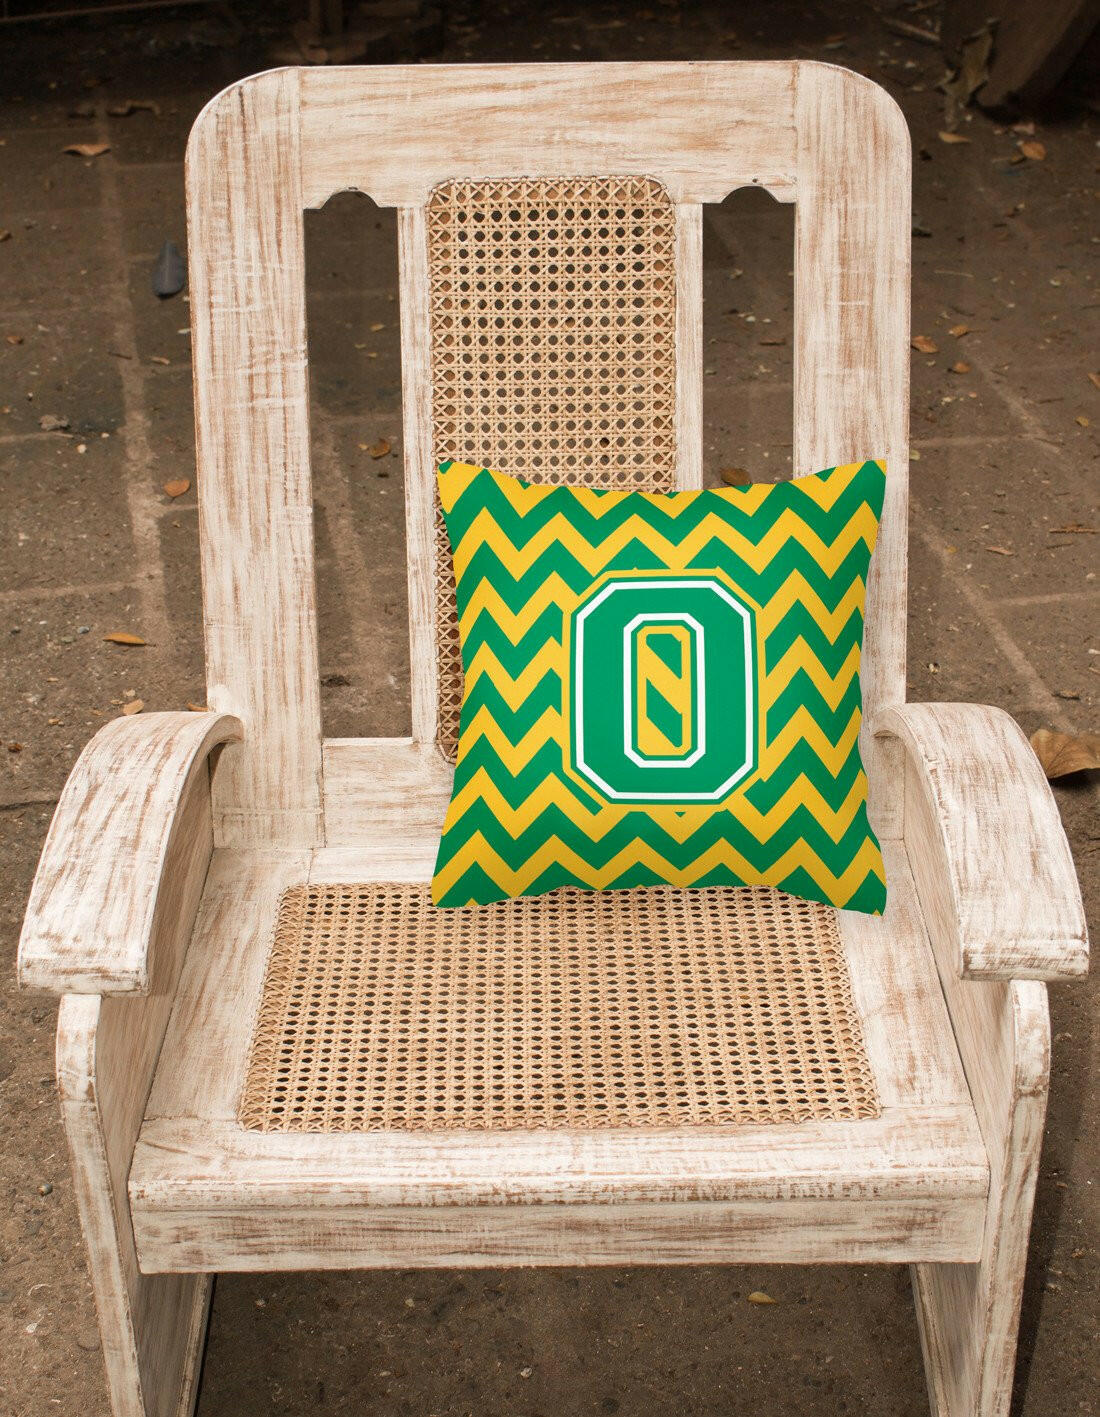 Letter O Chevron Green and Gold Fabric Decorative Pillow CJ1059-OPW1414 by Caroline's Treasures